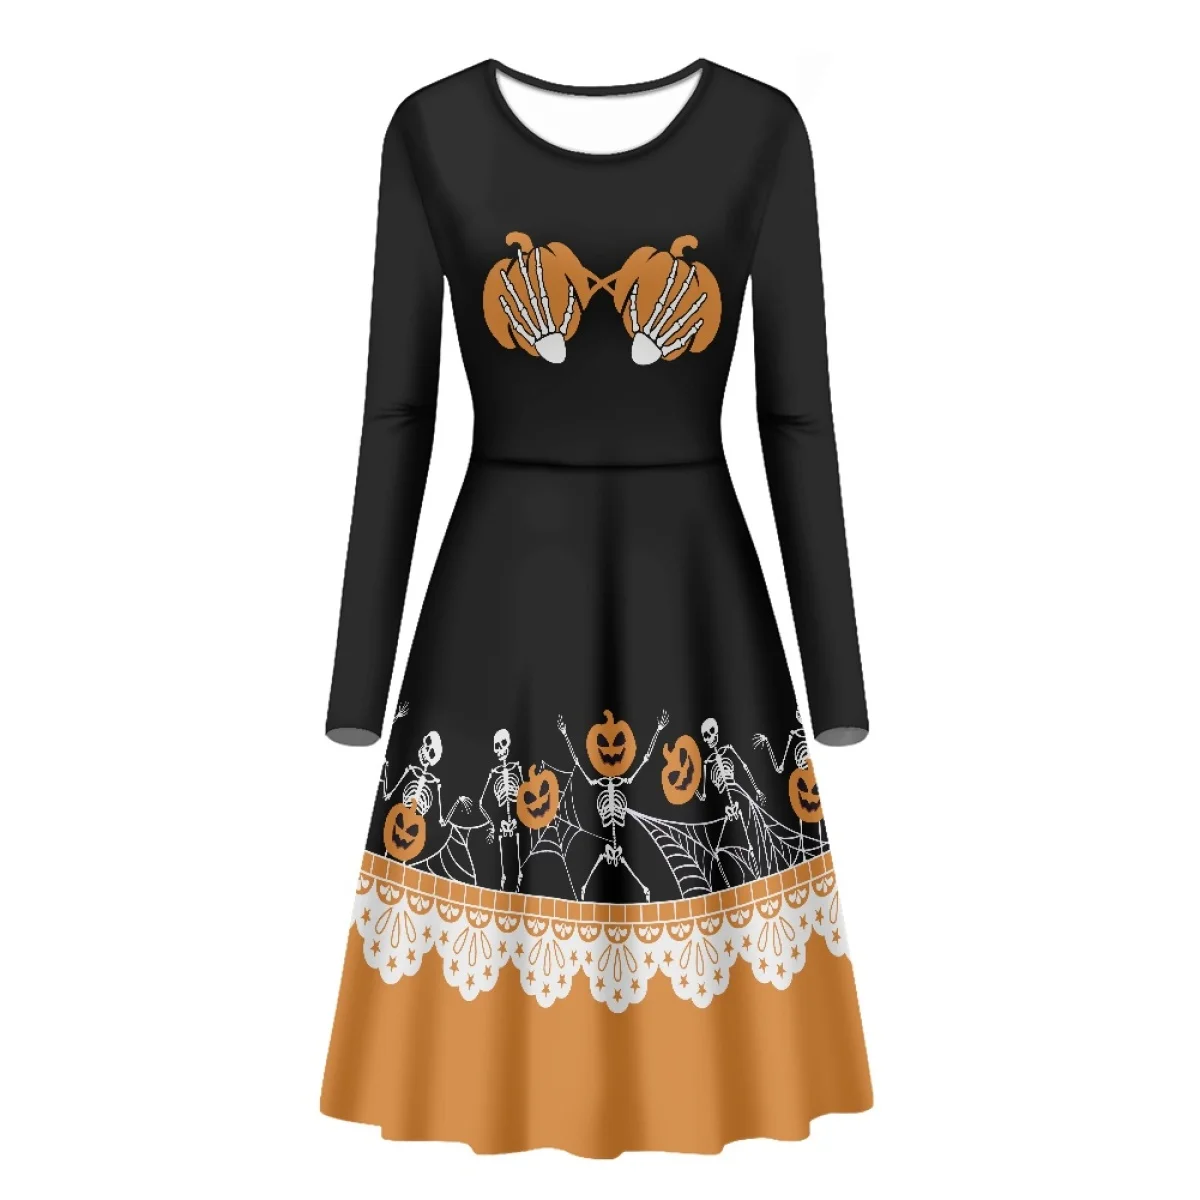 

HYCOOL Women's Halloween Costume Spooky Pumpkin Spider Web Skull Print Holidays Or Daily Casual New in Drawstring Dress